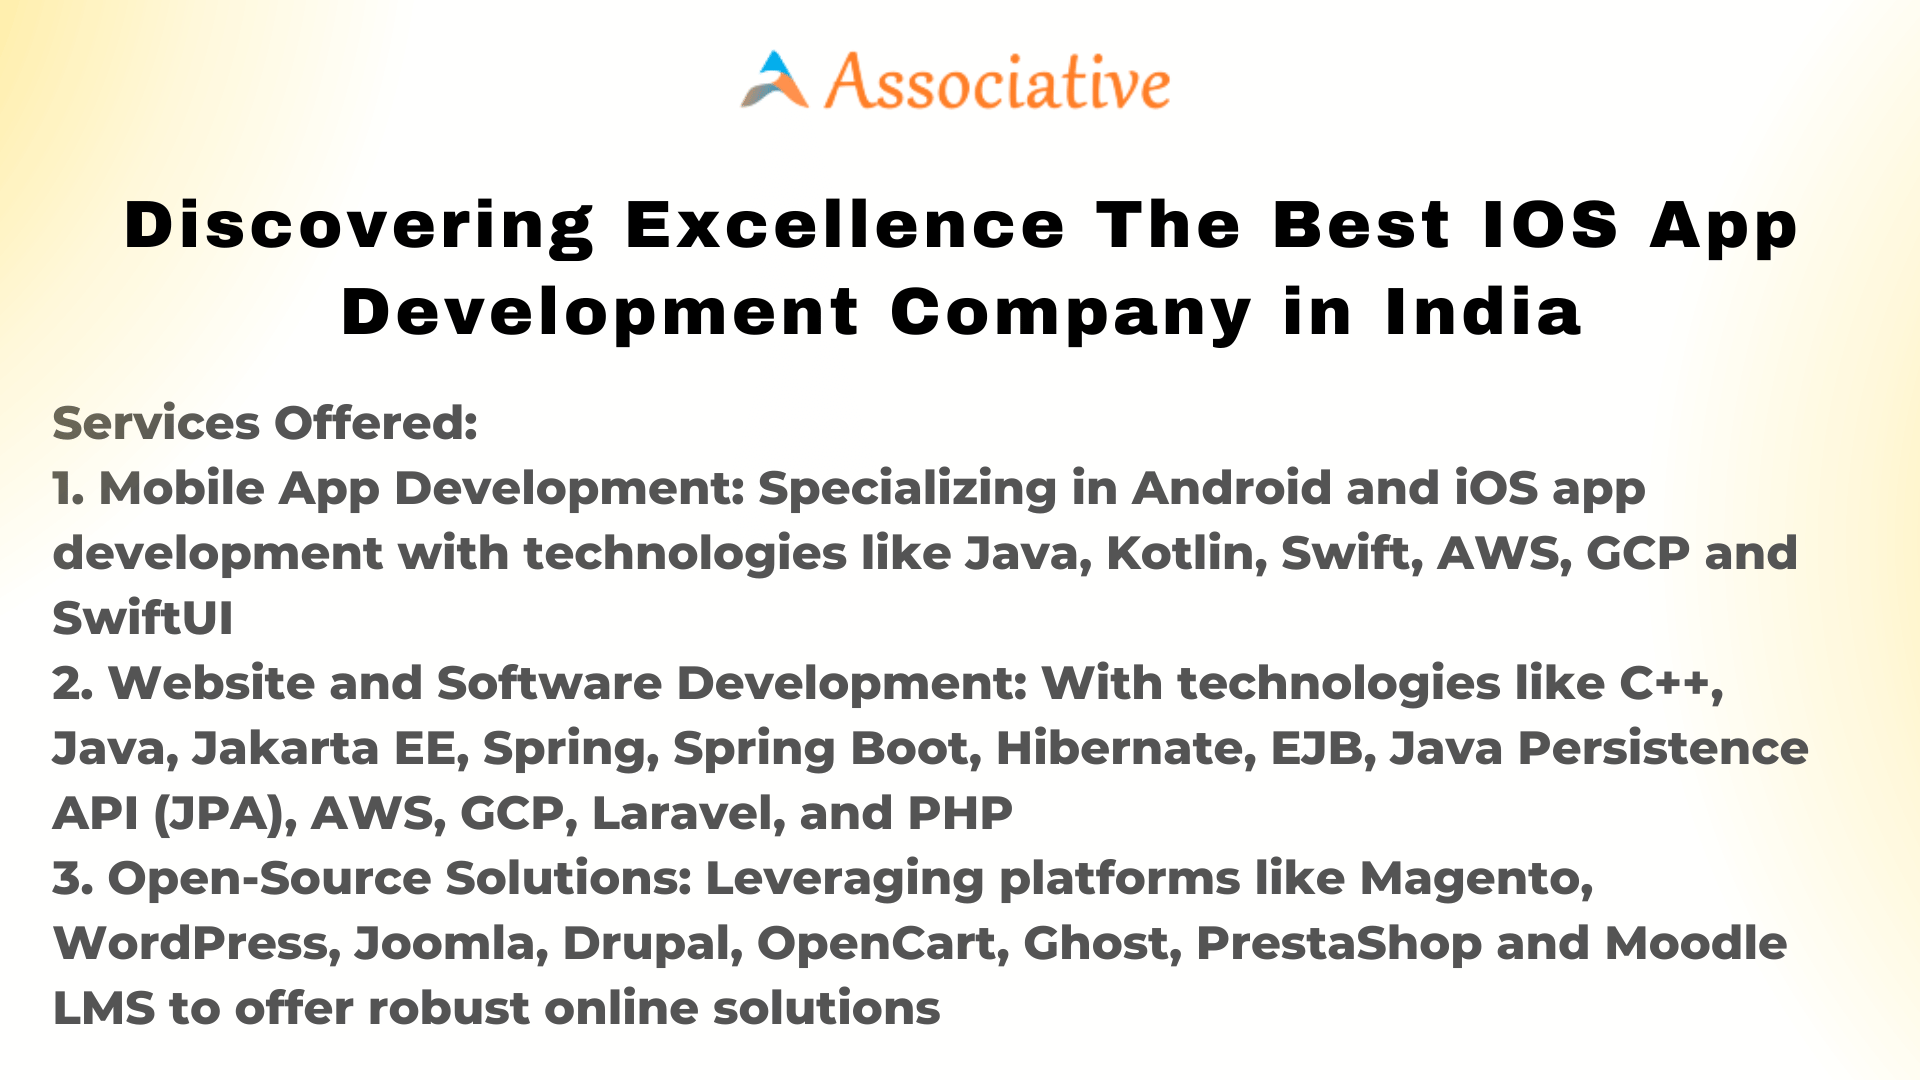 Discovering Excellence The Best IOS App Development Company in India